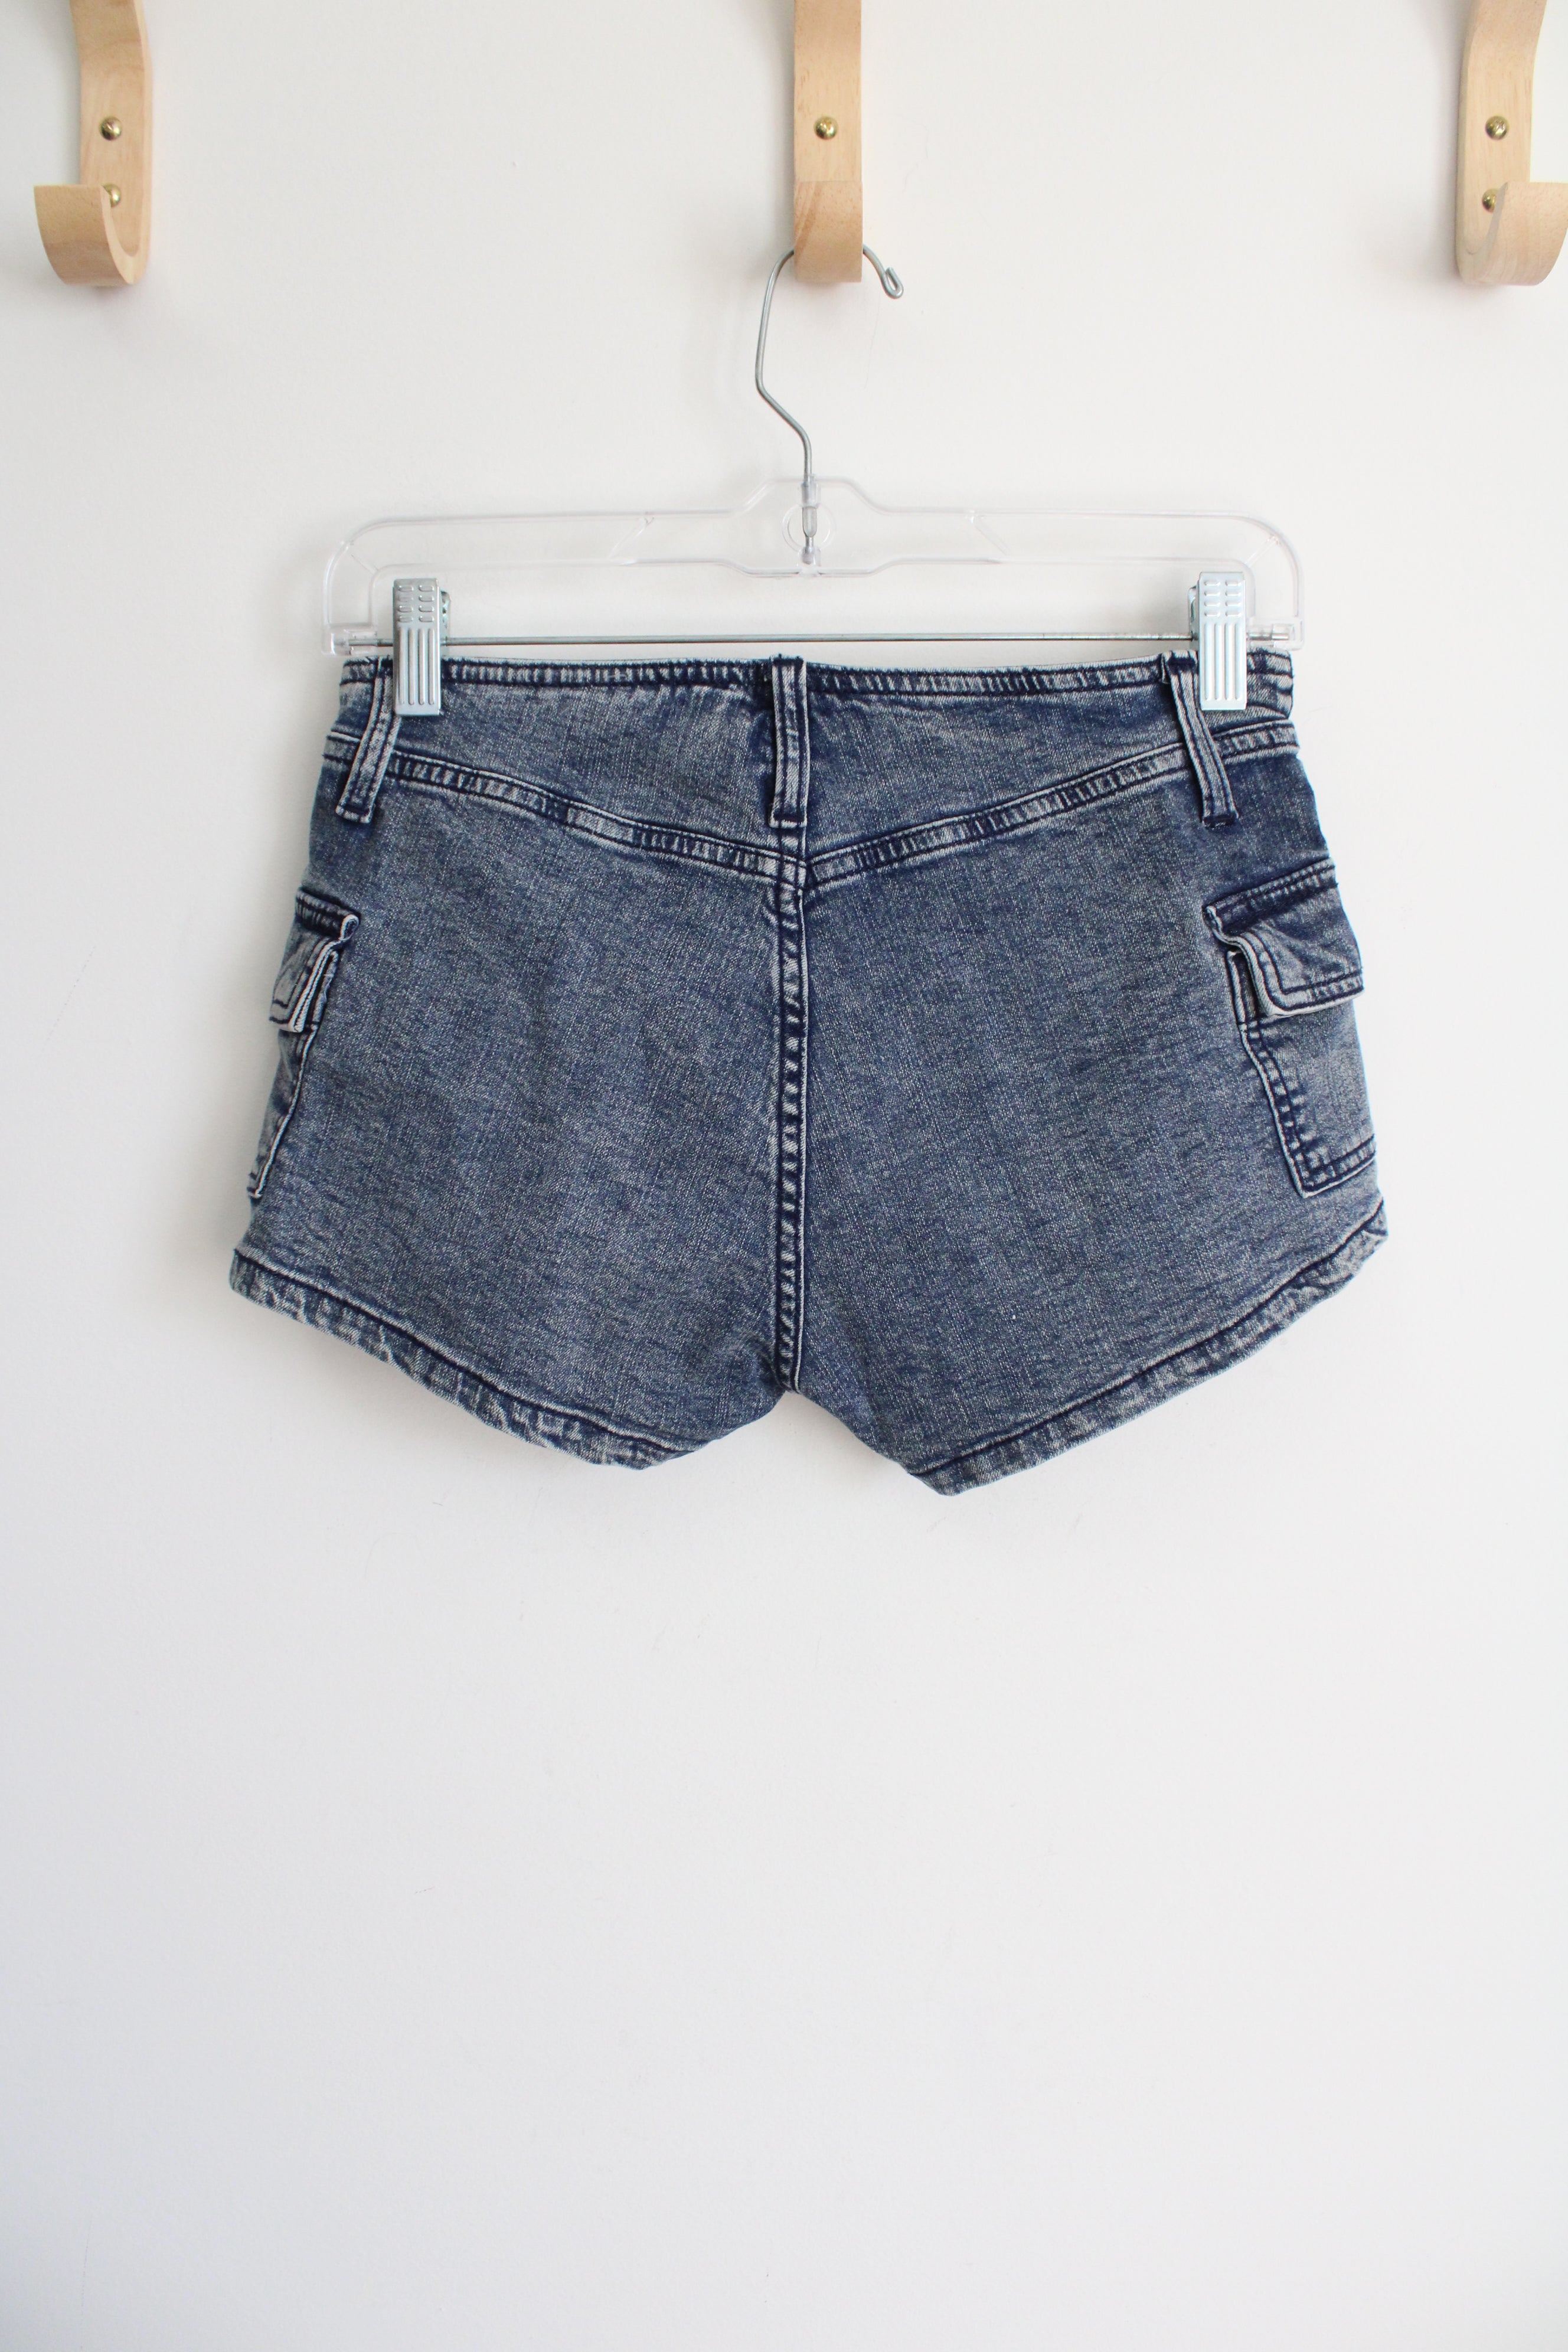 NEW Wild Fable Low Rise Denim Shorts | 0